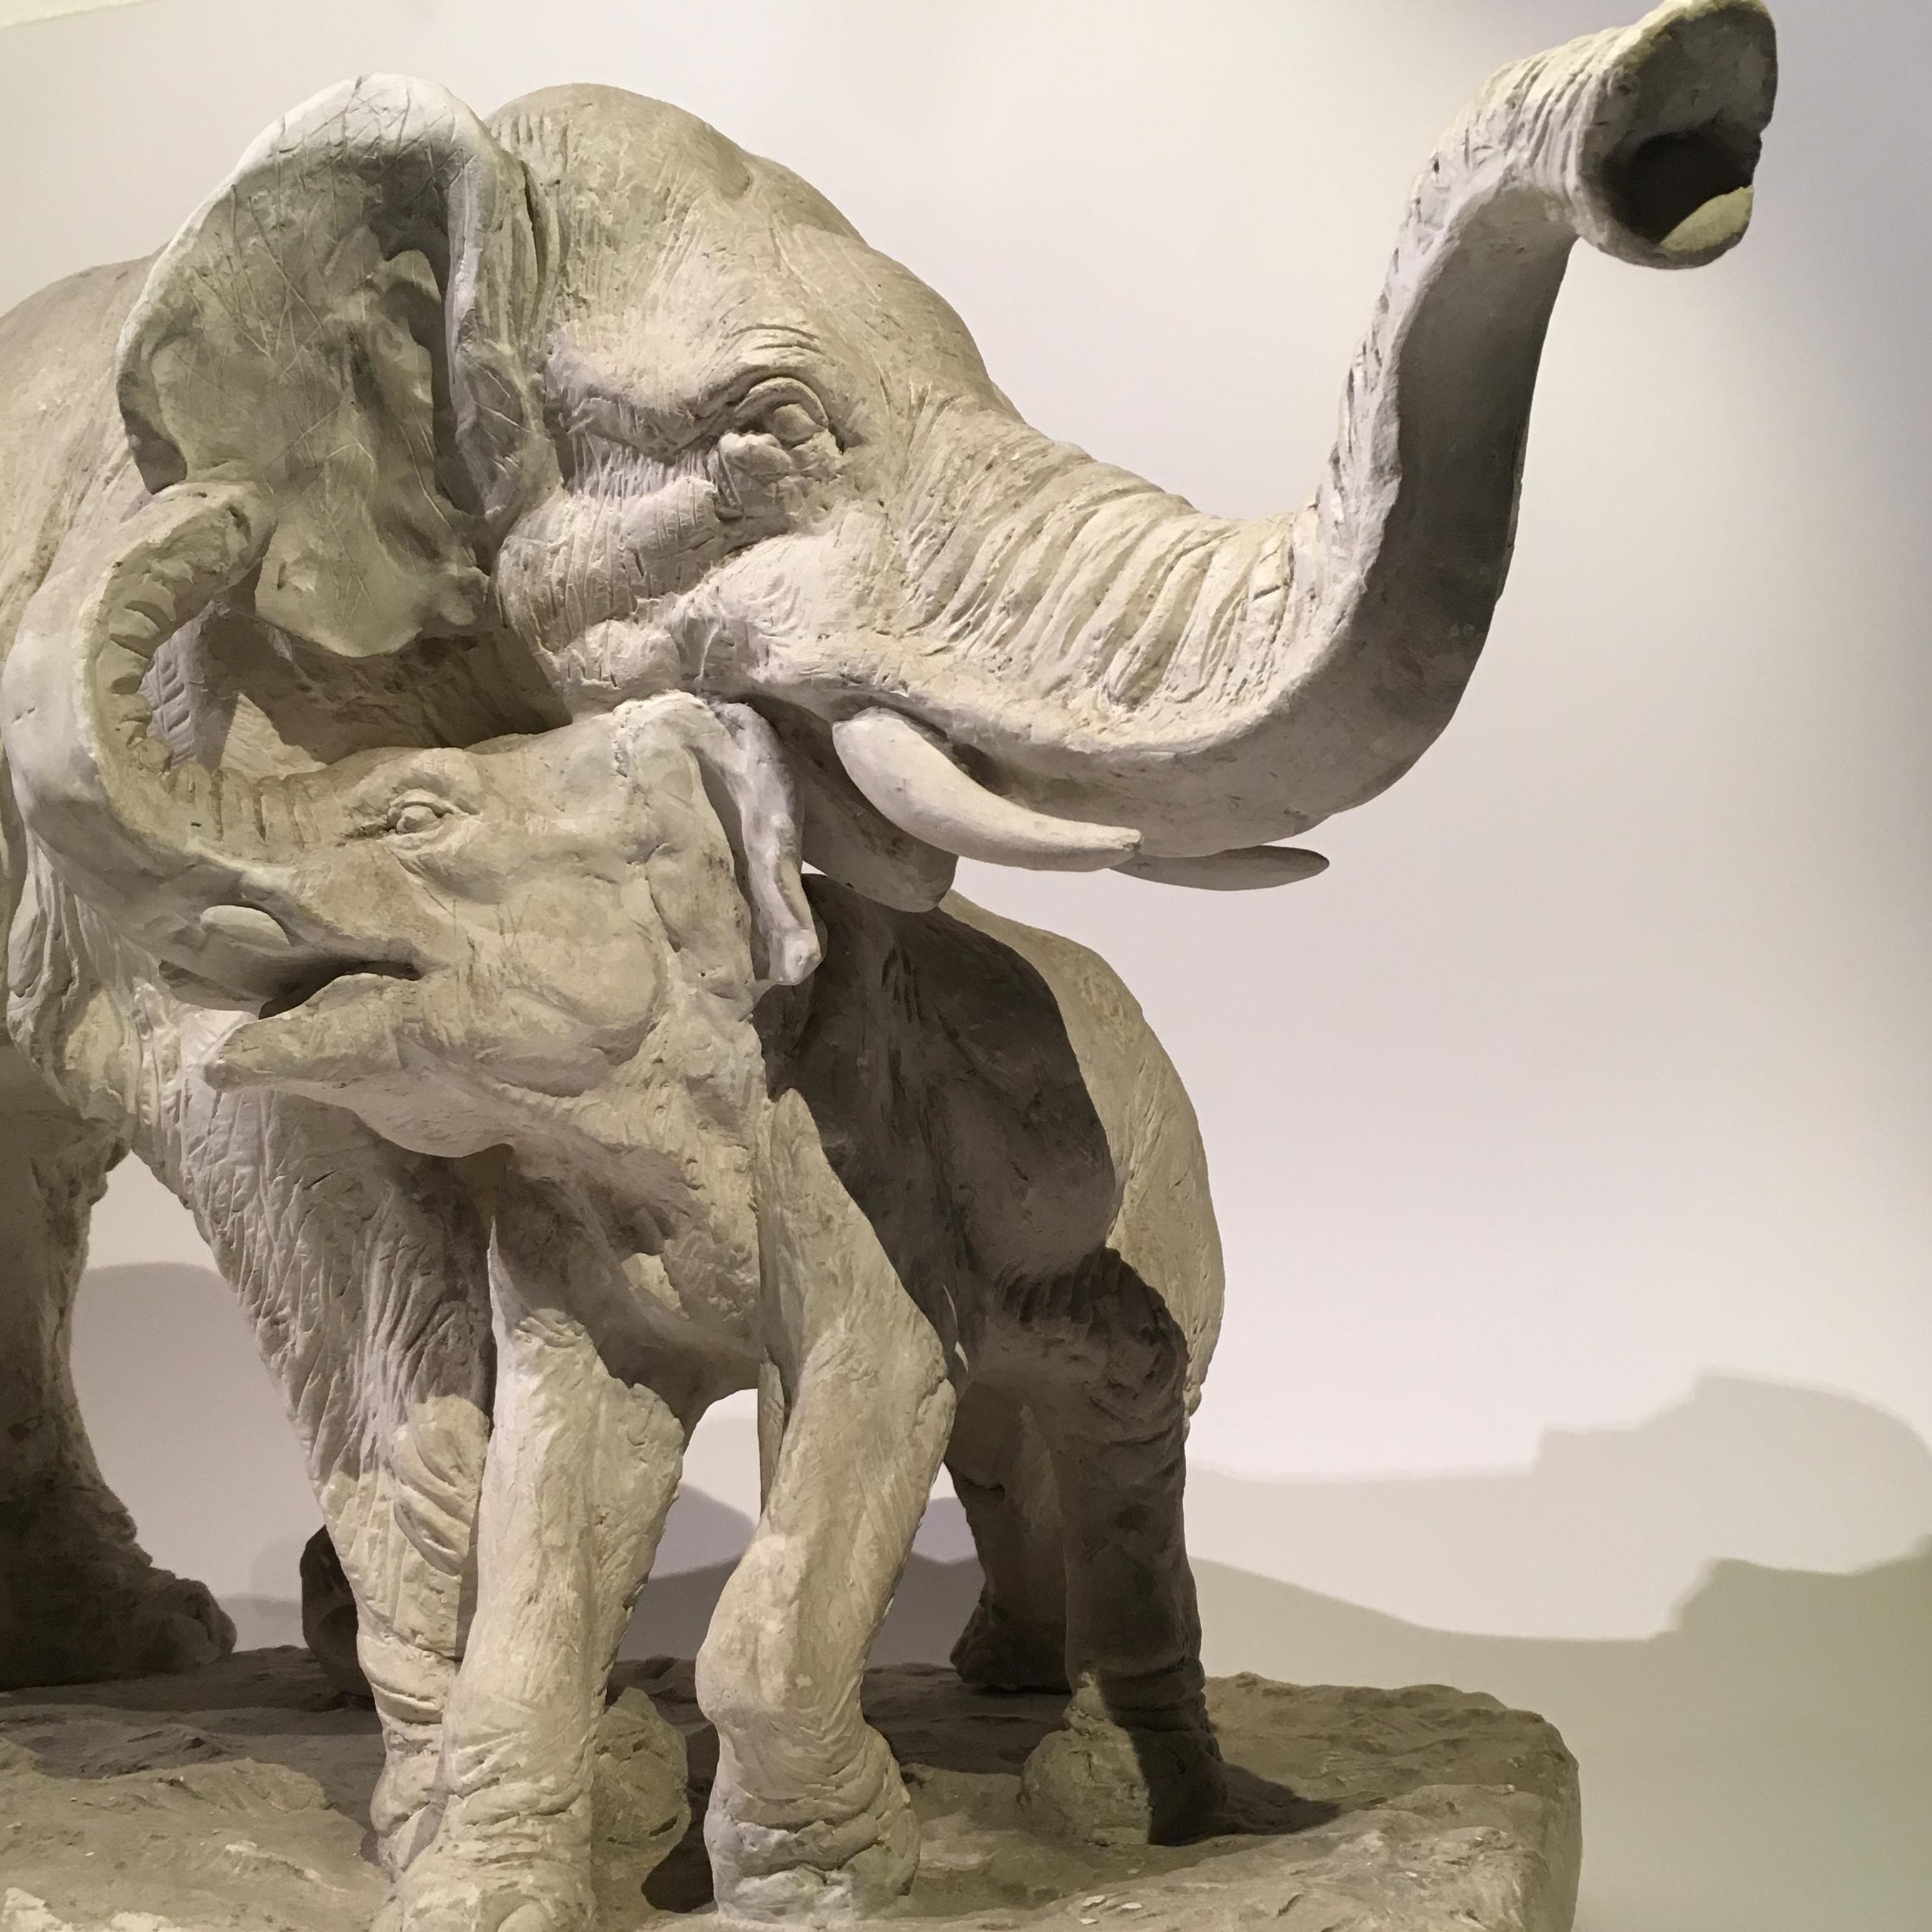 A charming plaster sculpture depicting an elephant mother with its baby.
This beautiful plaster sculpture is signed on the base: M. Bandini.
Italy, early 20th century.